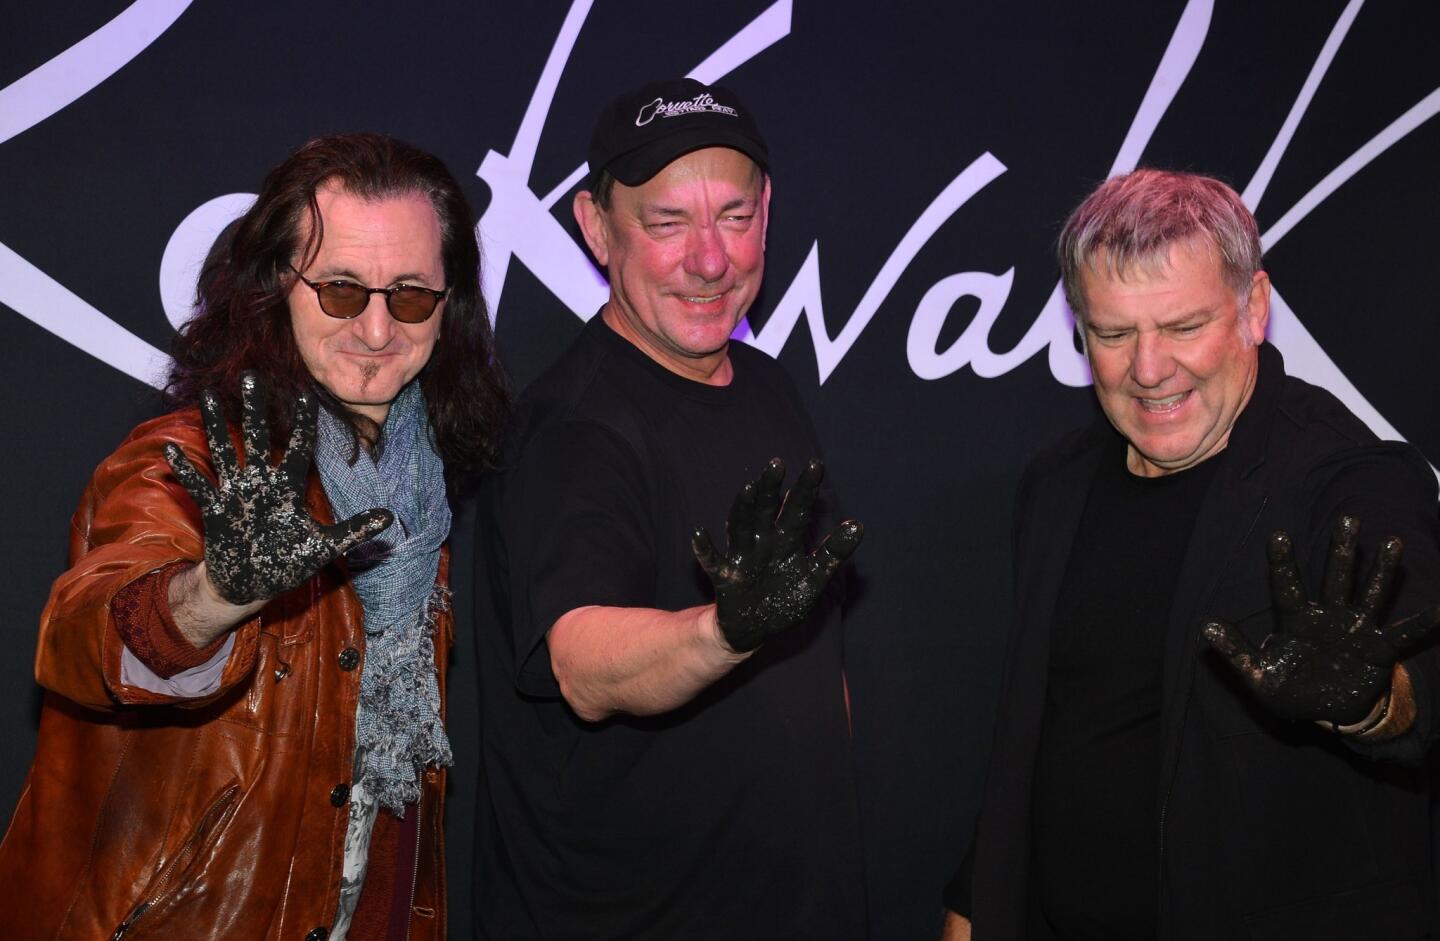 Geddy Lee, Neil Peart and Alex Lifeson of Rush, whose hits include "New World Man" and "Show Don't Tell."